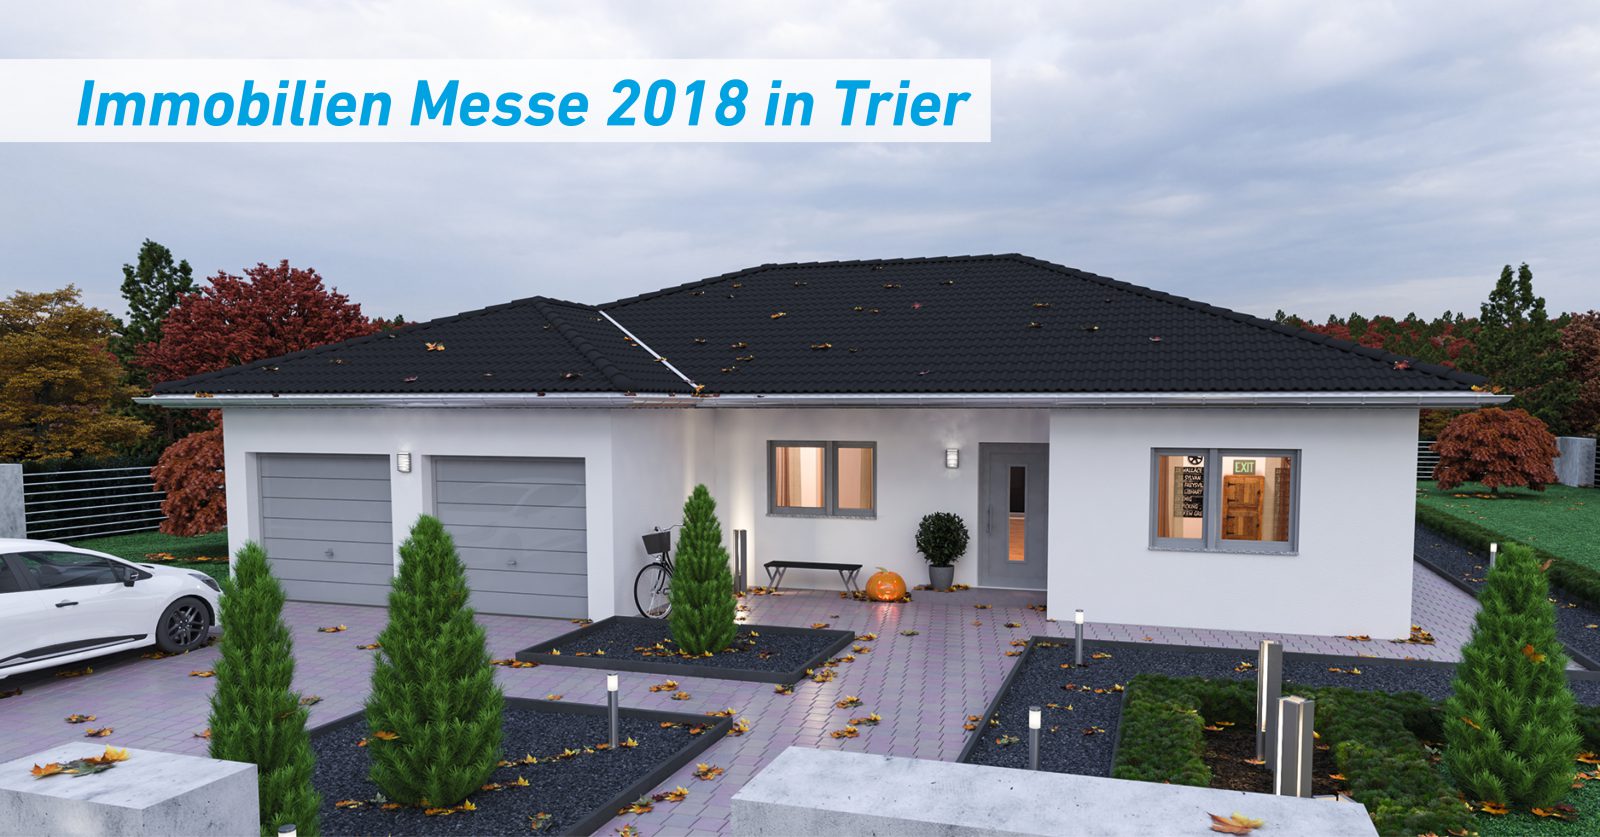 Immobilien Messe 2018 in Trier